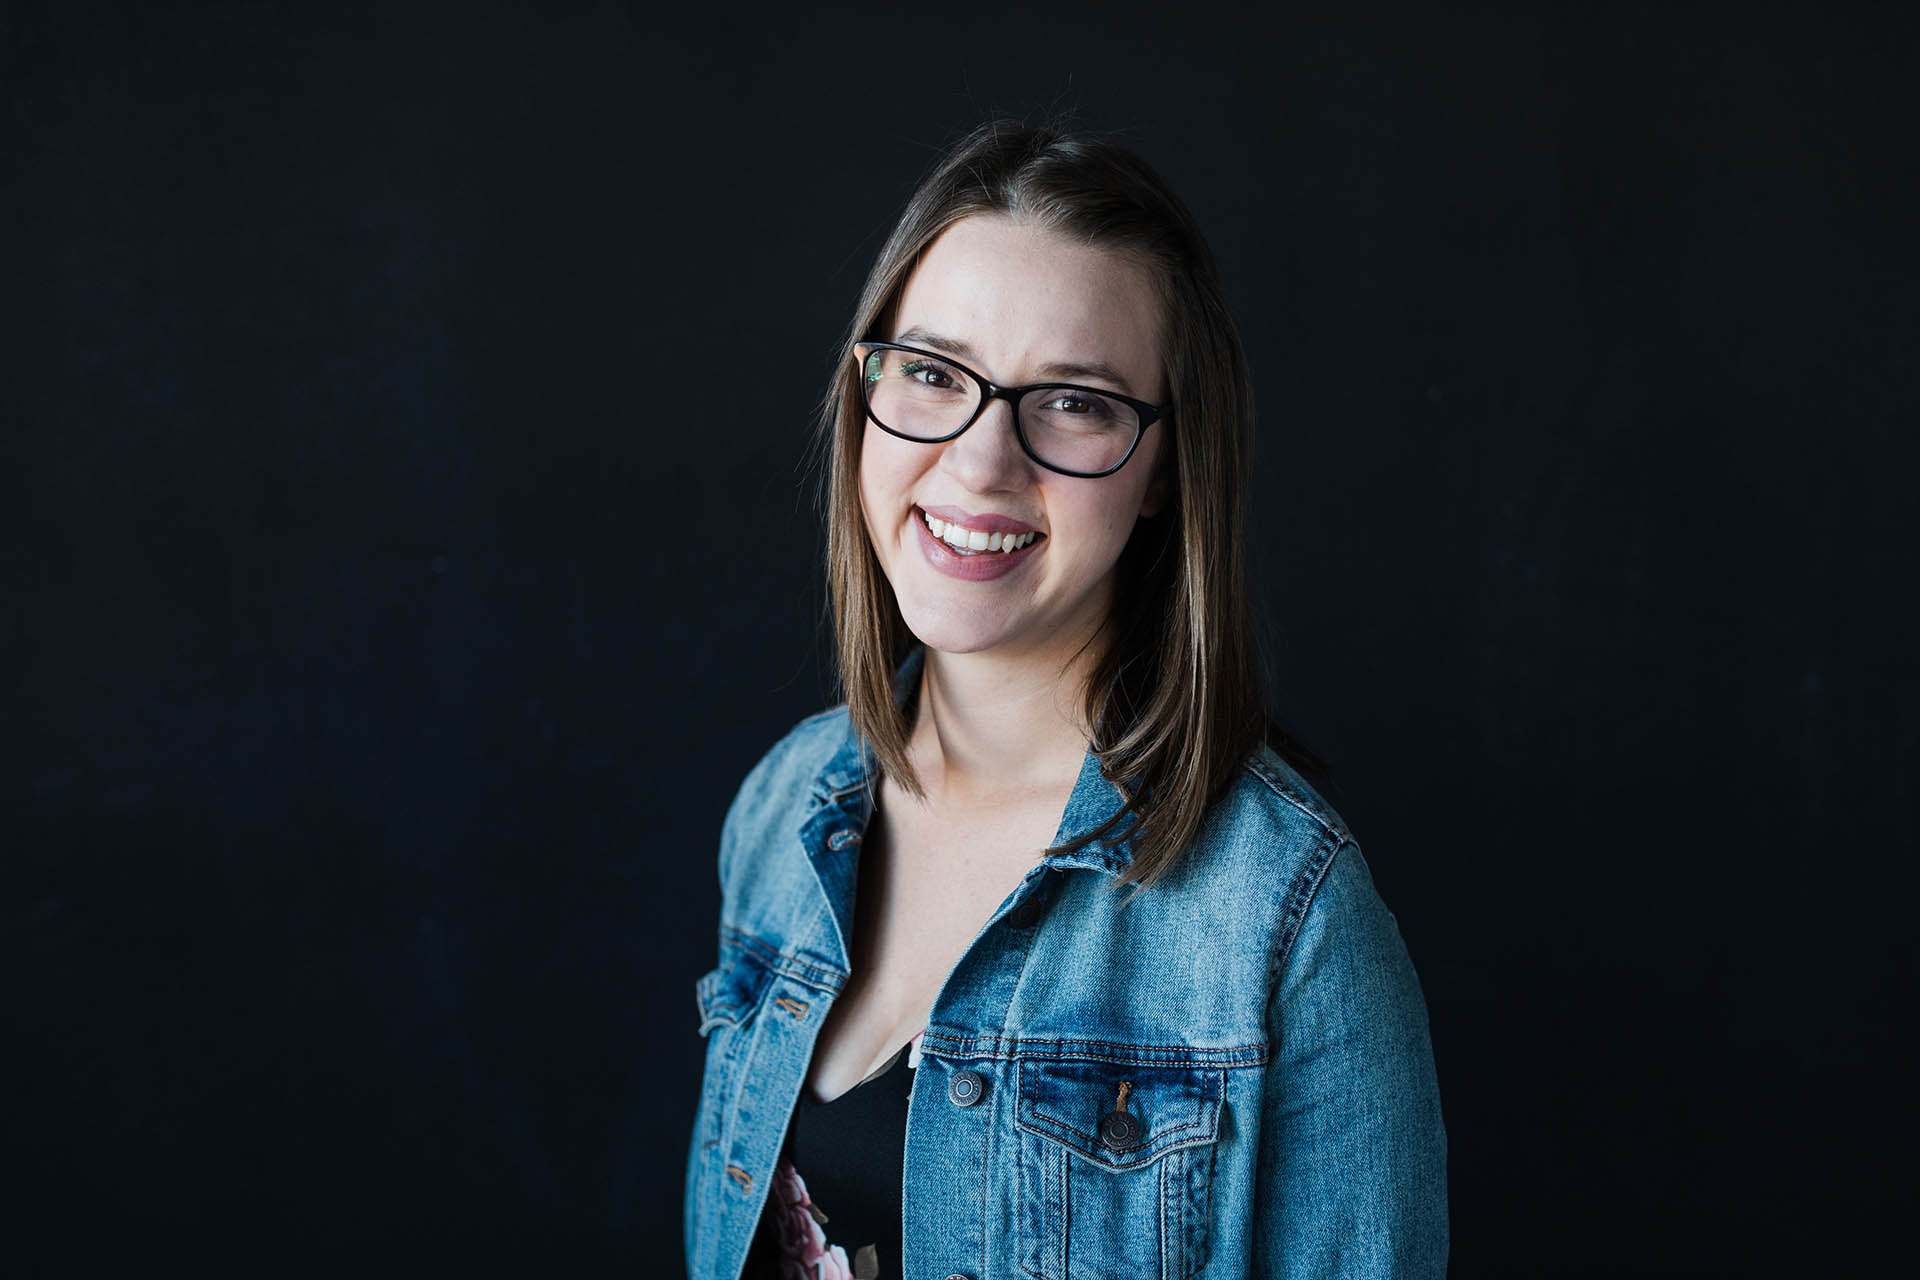 Fort Worth headshot photography; photo of a woman in a black top and denim jacket and glasses smiling in front of a black background